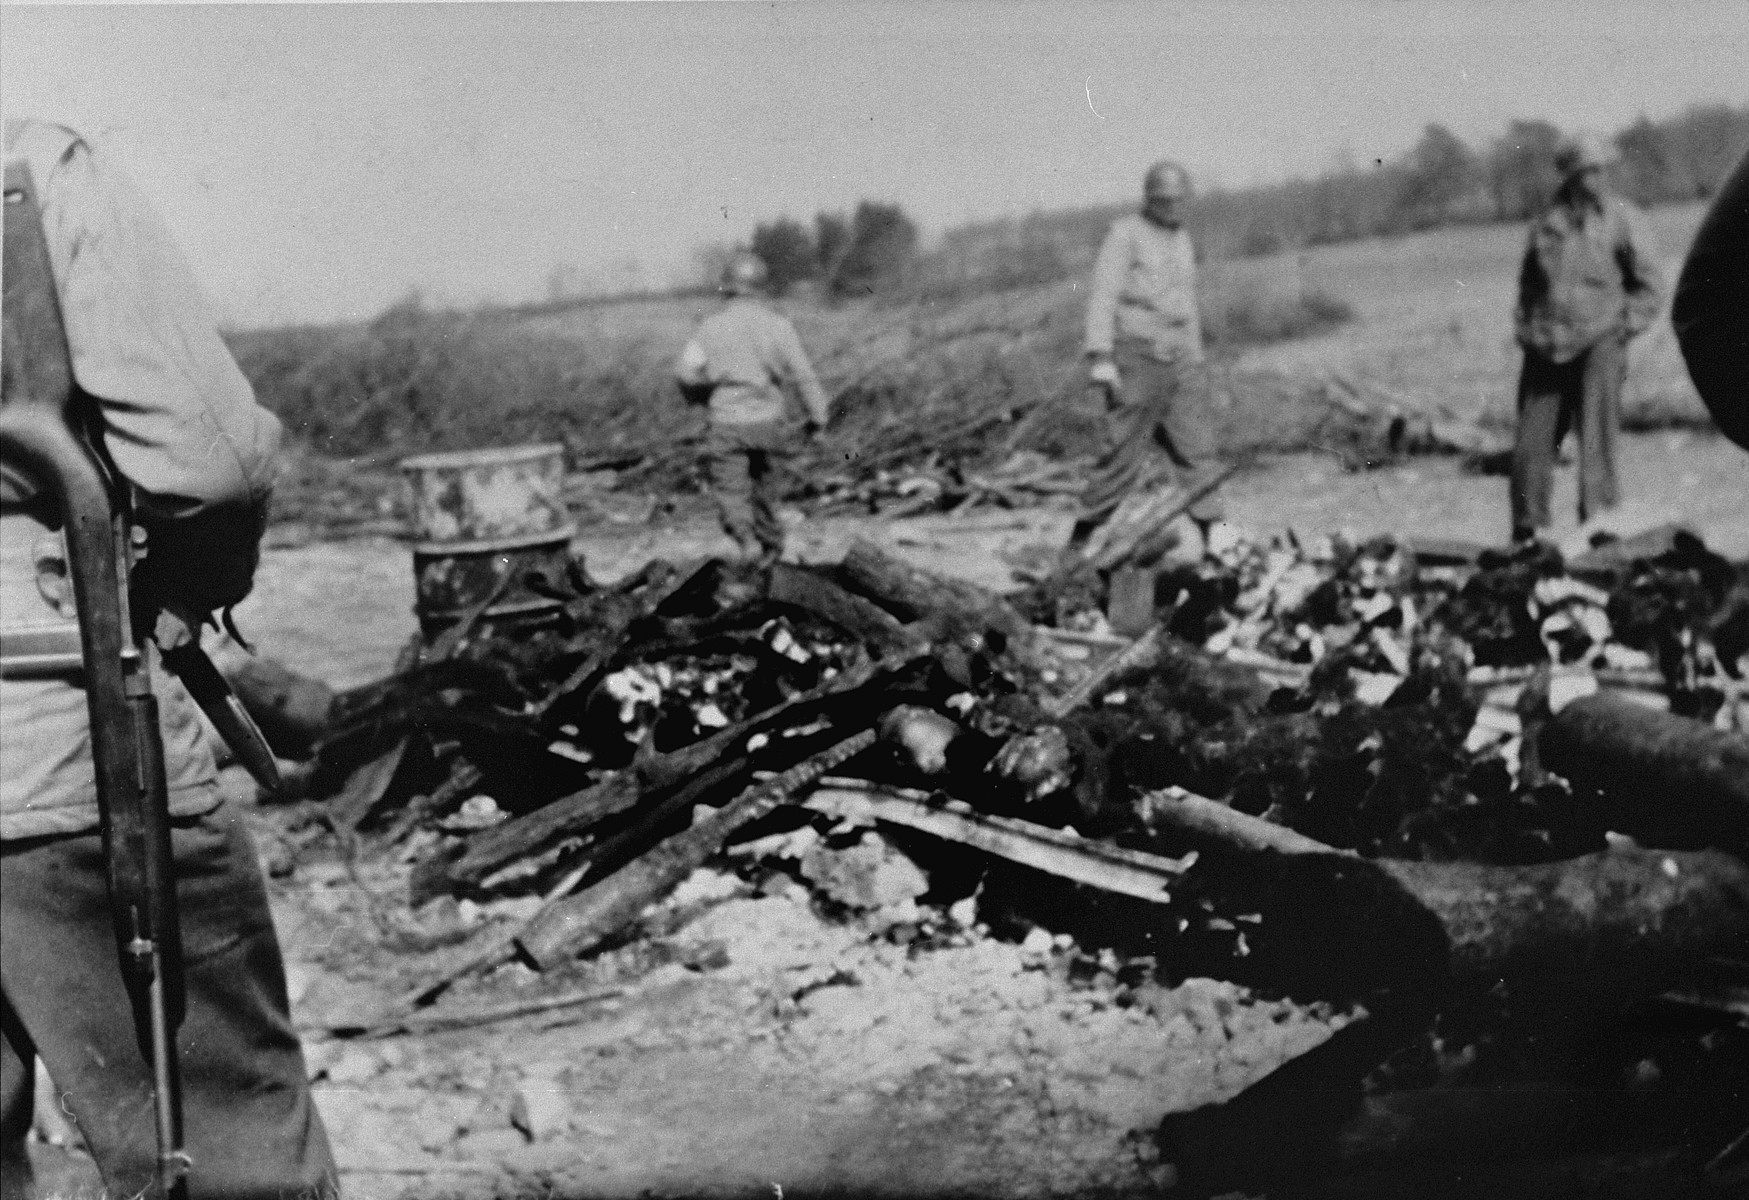 While on an inspection tour of the newly liberated Ohrdruf concentration camp, American soldiers view the charred remains of prisoners that were burned upon a section of railroad track during the evacuation of the camp.